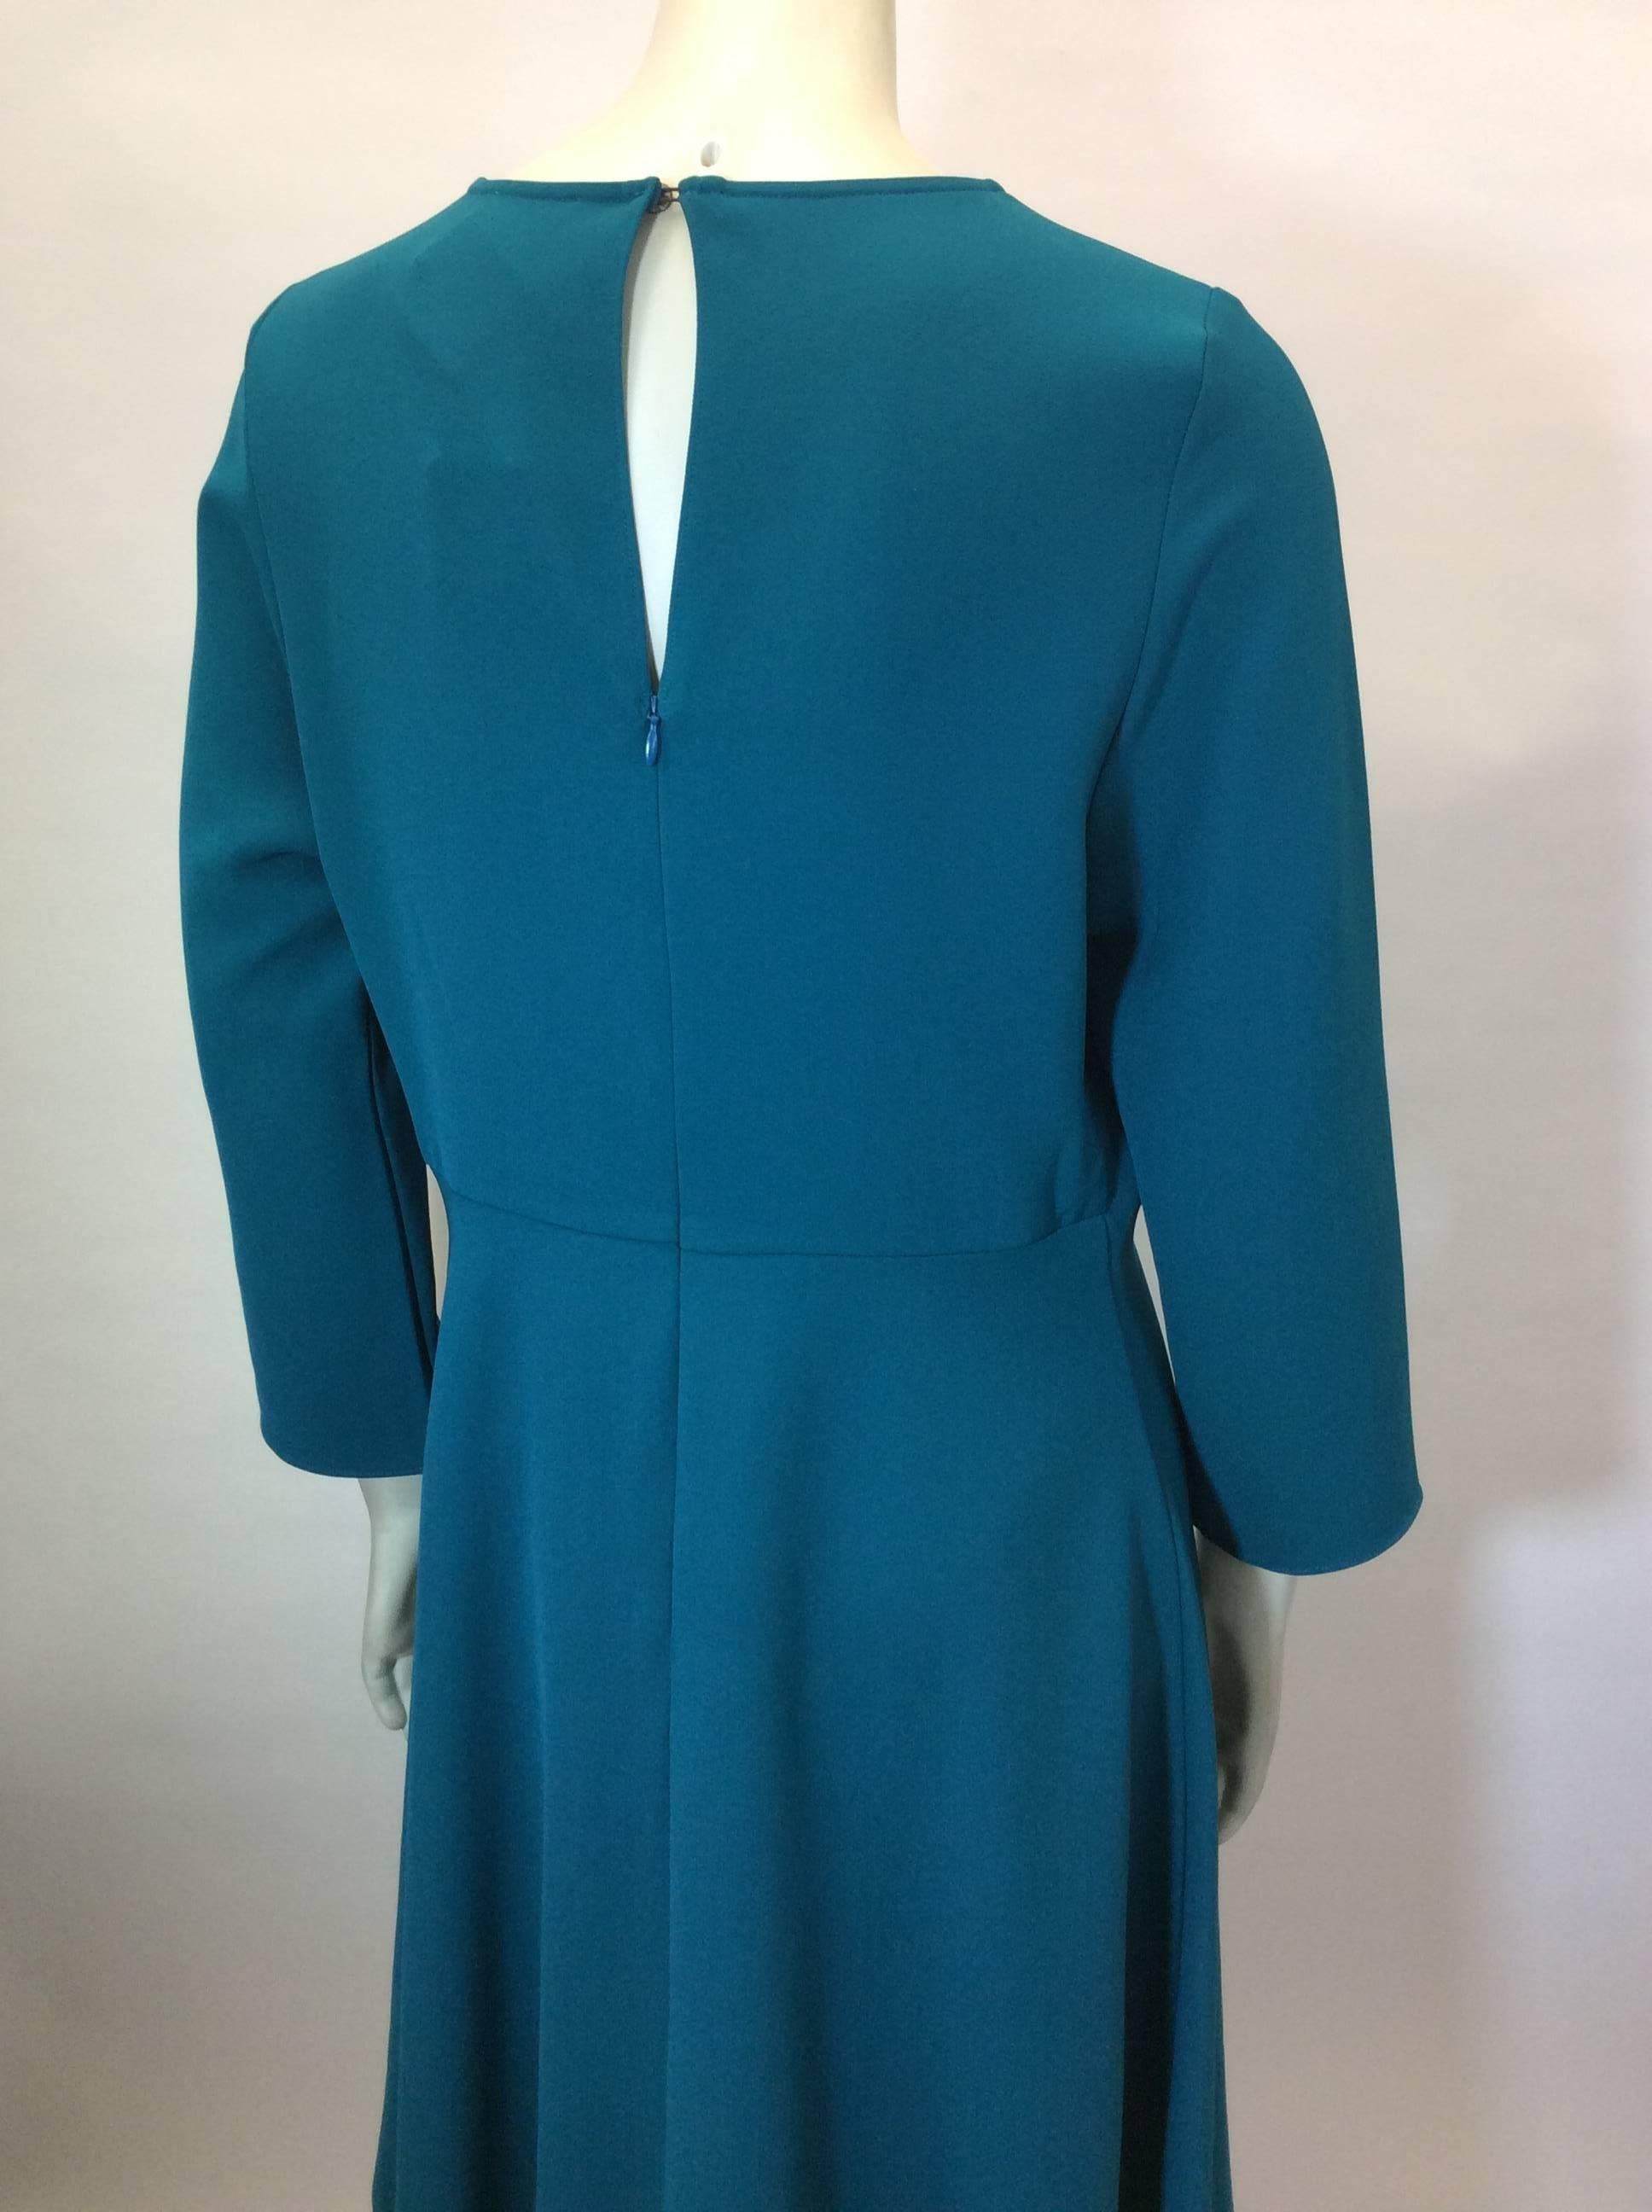 Parosh Teal Skater Style Dress with 3/4 Sleeves In New Condition For Sale In Narberth, PA